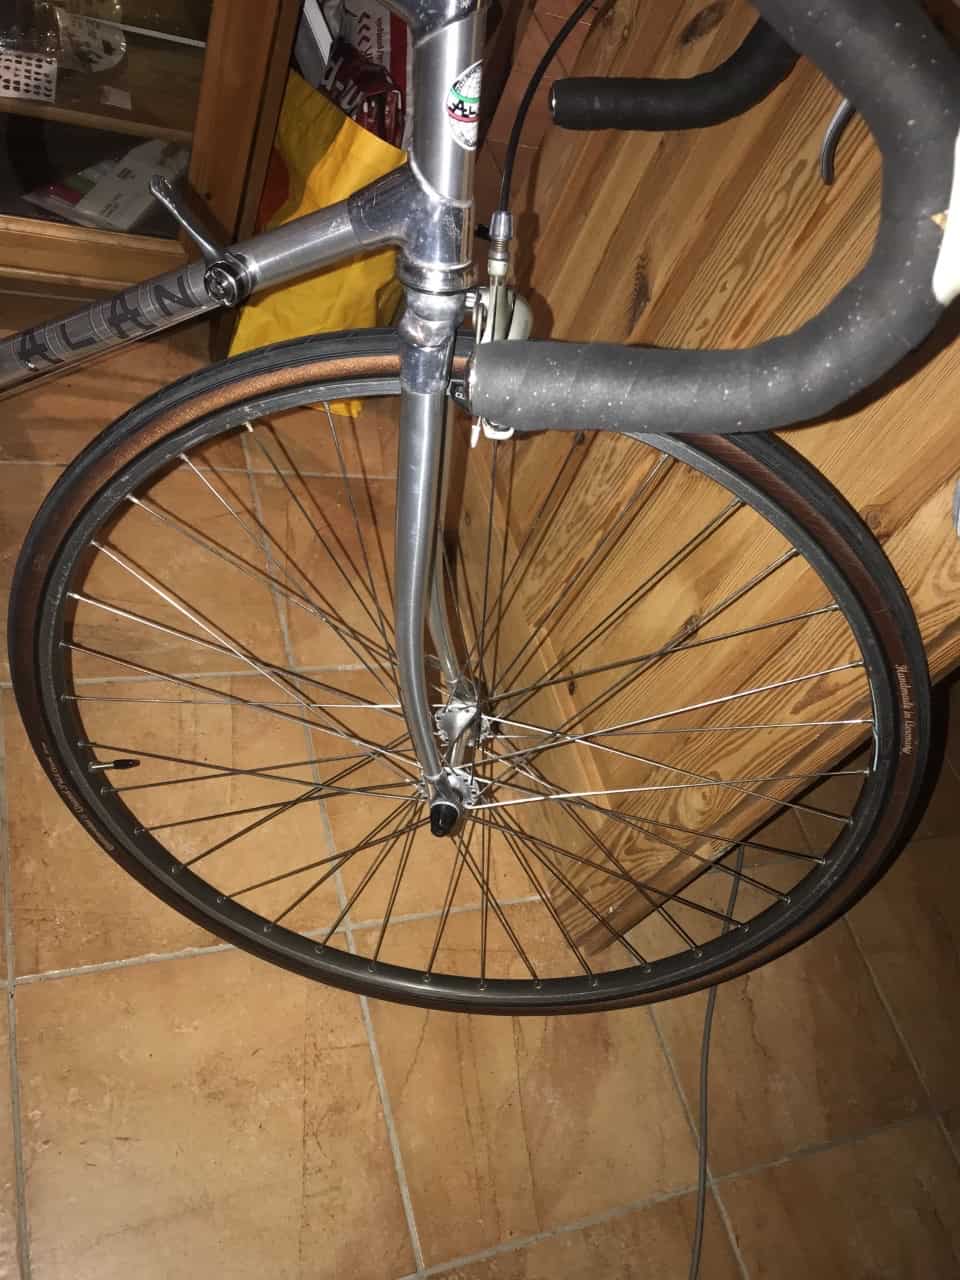 Image of forks and front wheel of Alan bike